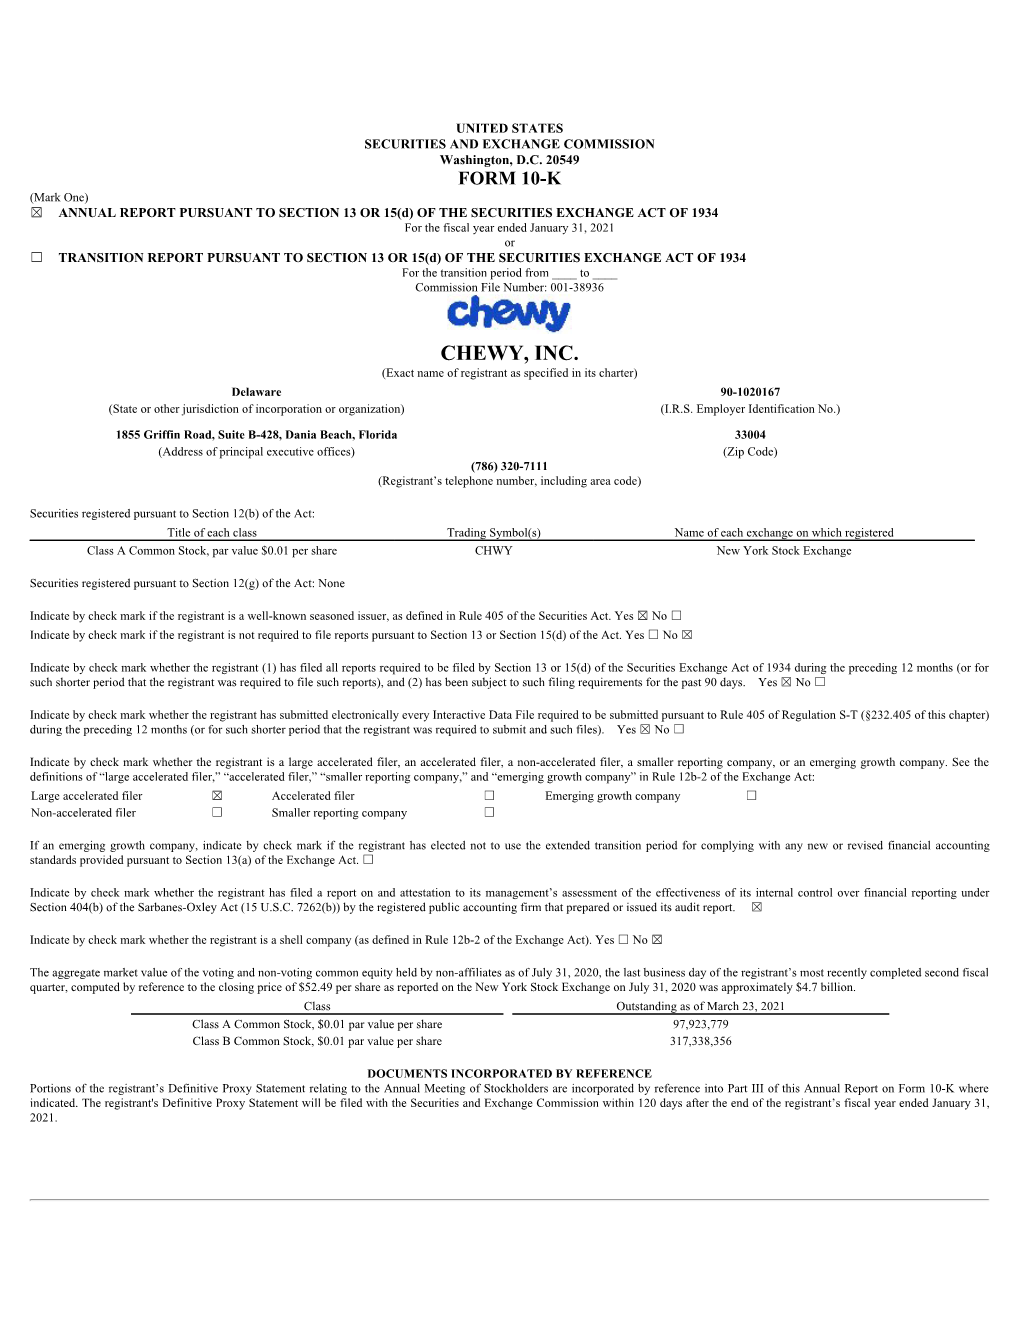 CHEWY, INC. (Exact Name of Registrant As Specified in Its Charter) Delaware 90-1020167 (State Or Other Jurisdiction of Incorporation Or Organization) (I.R.S